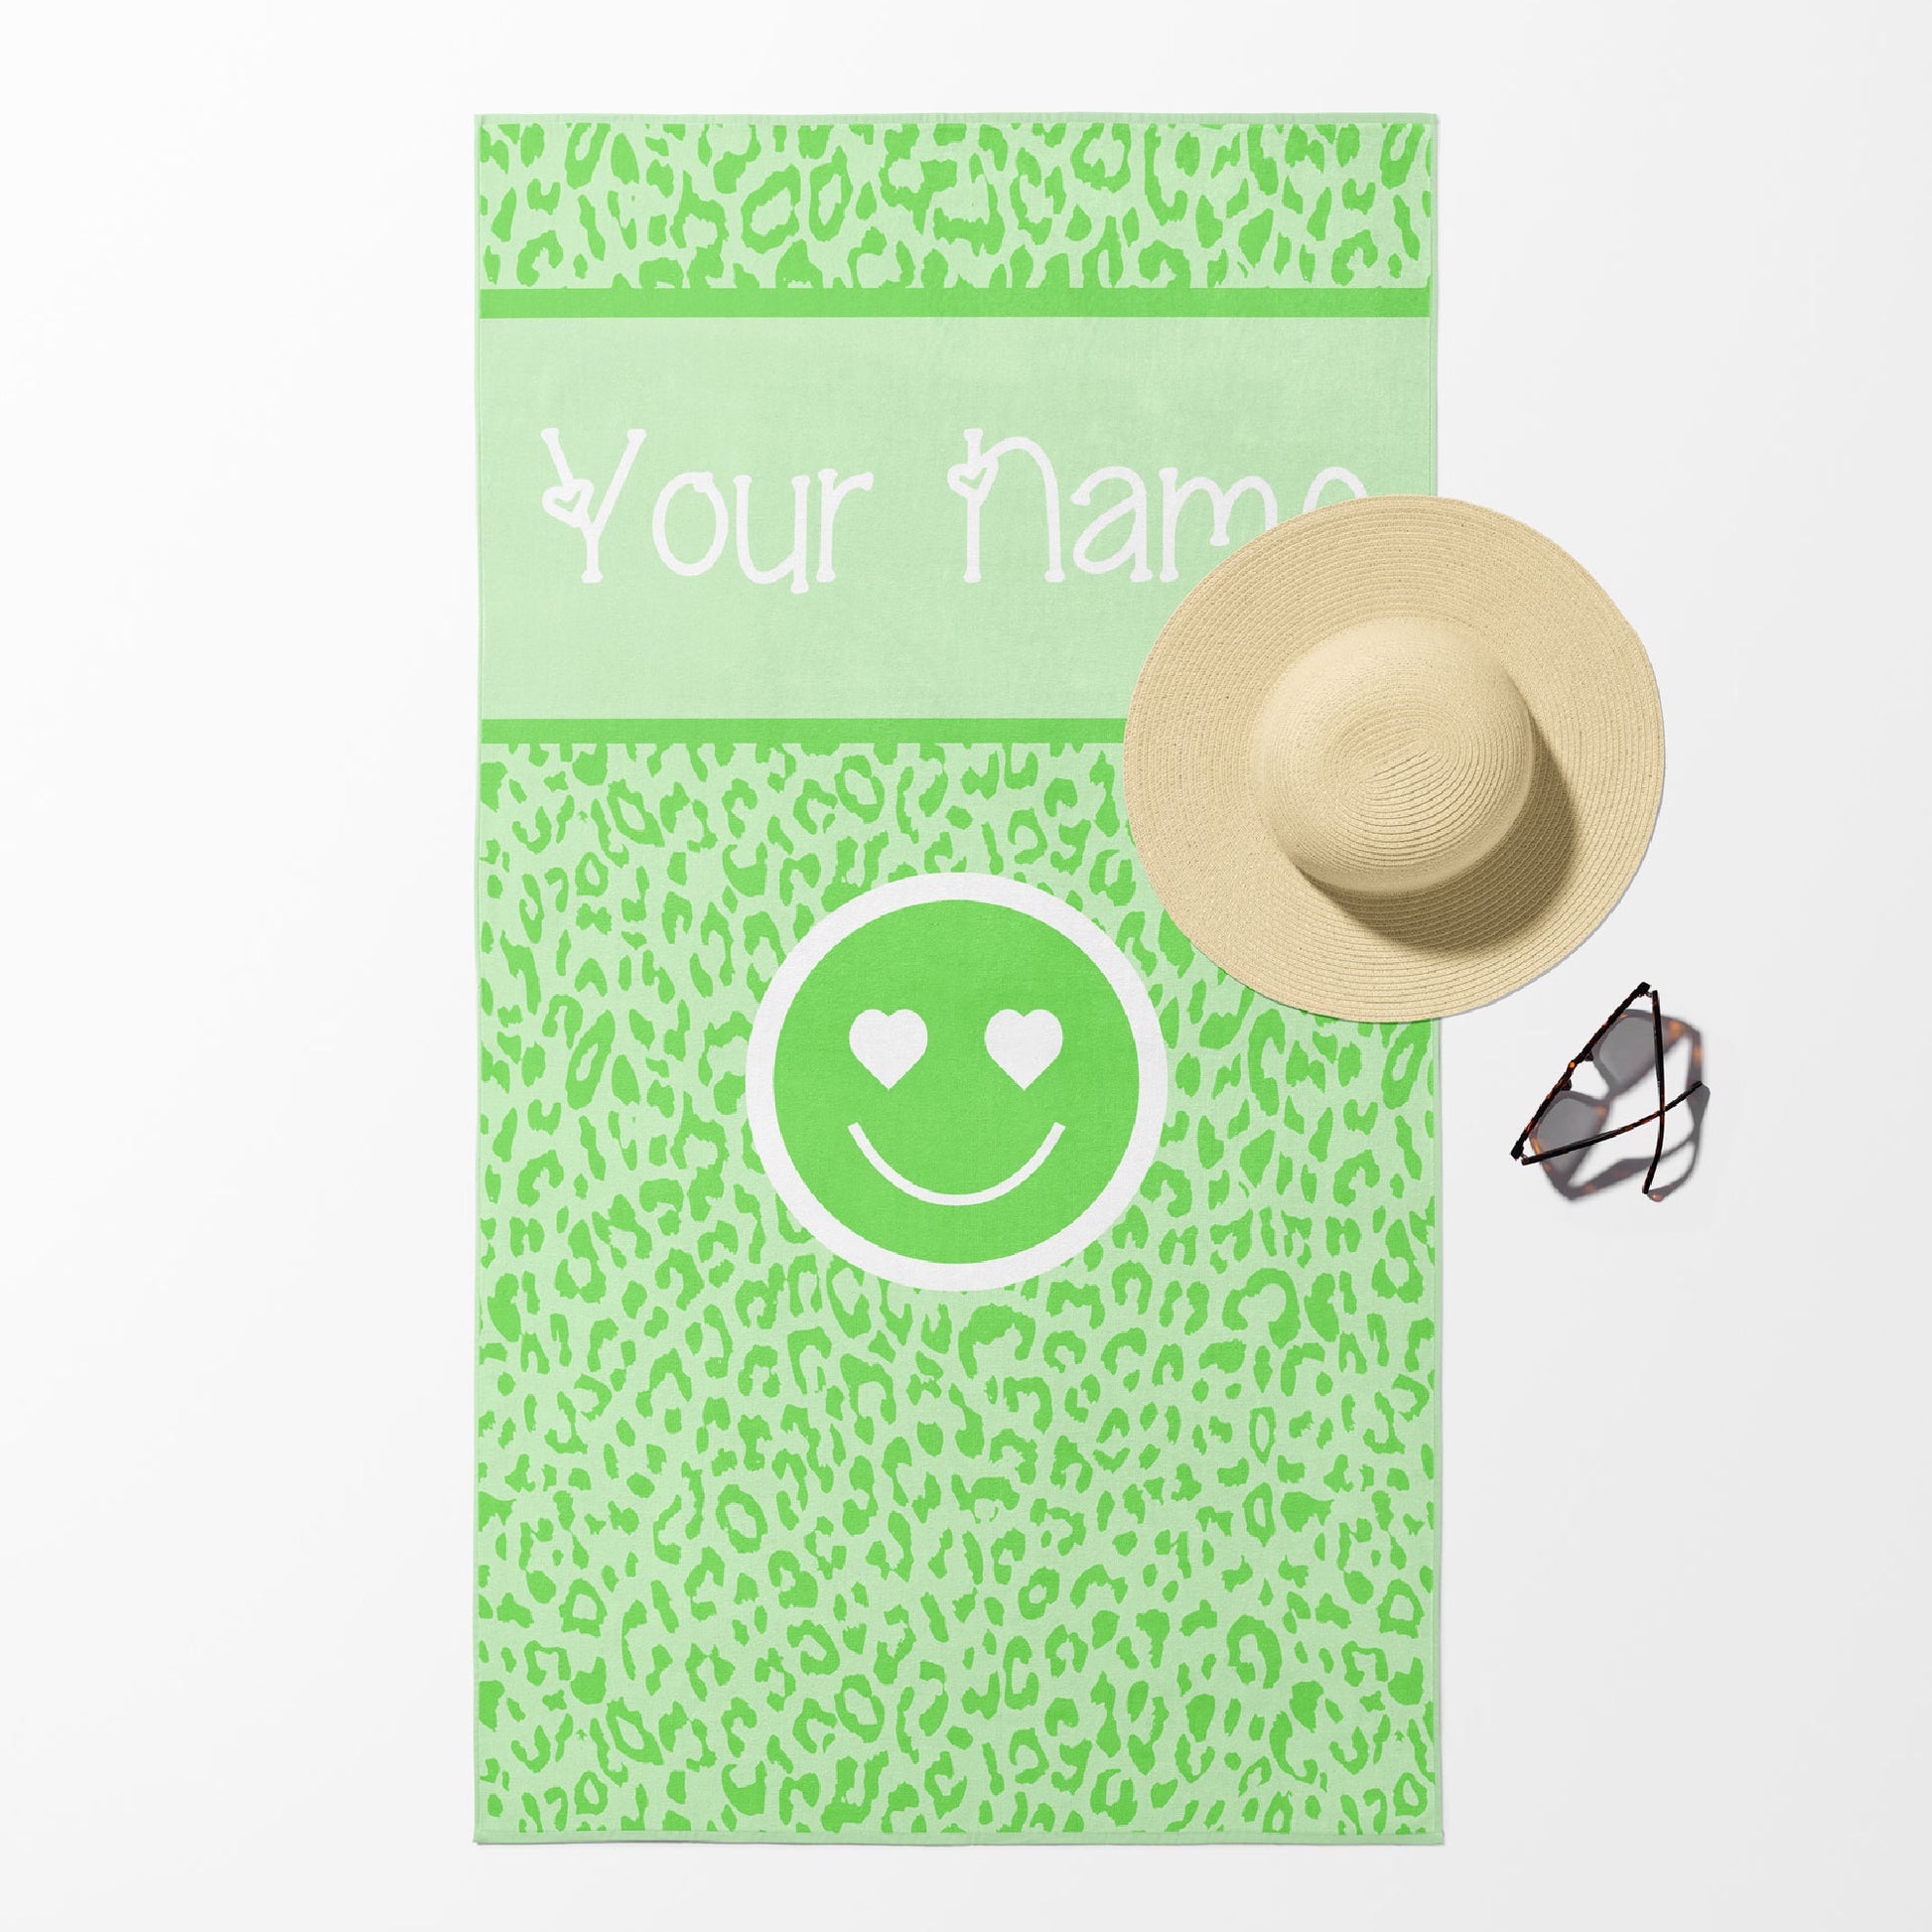 Beach towel in lime green leopard print with smiley face and customizable text.